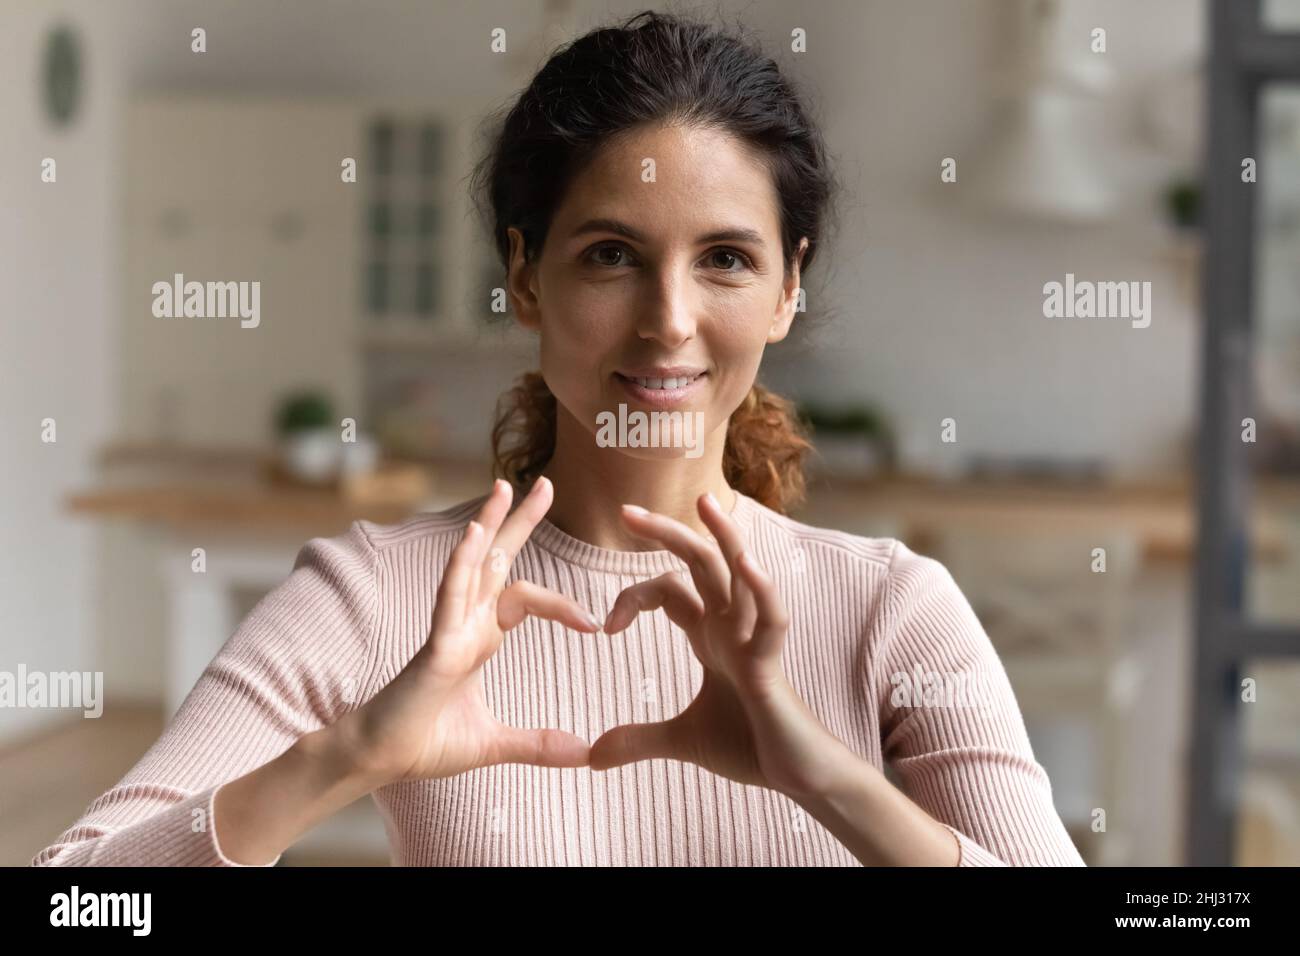 Latina woman makes heart symbol gesture with joined fingers Stock Photo